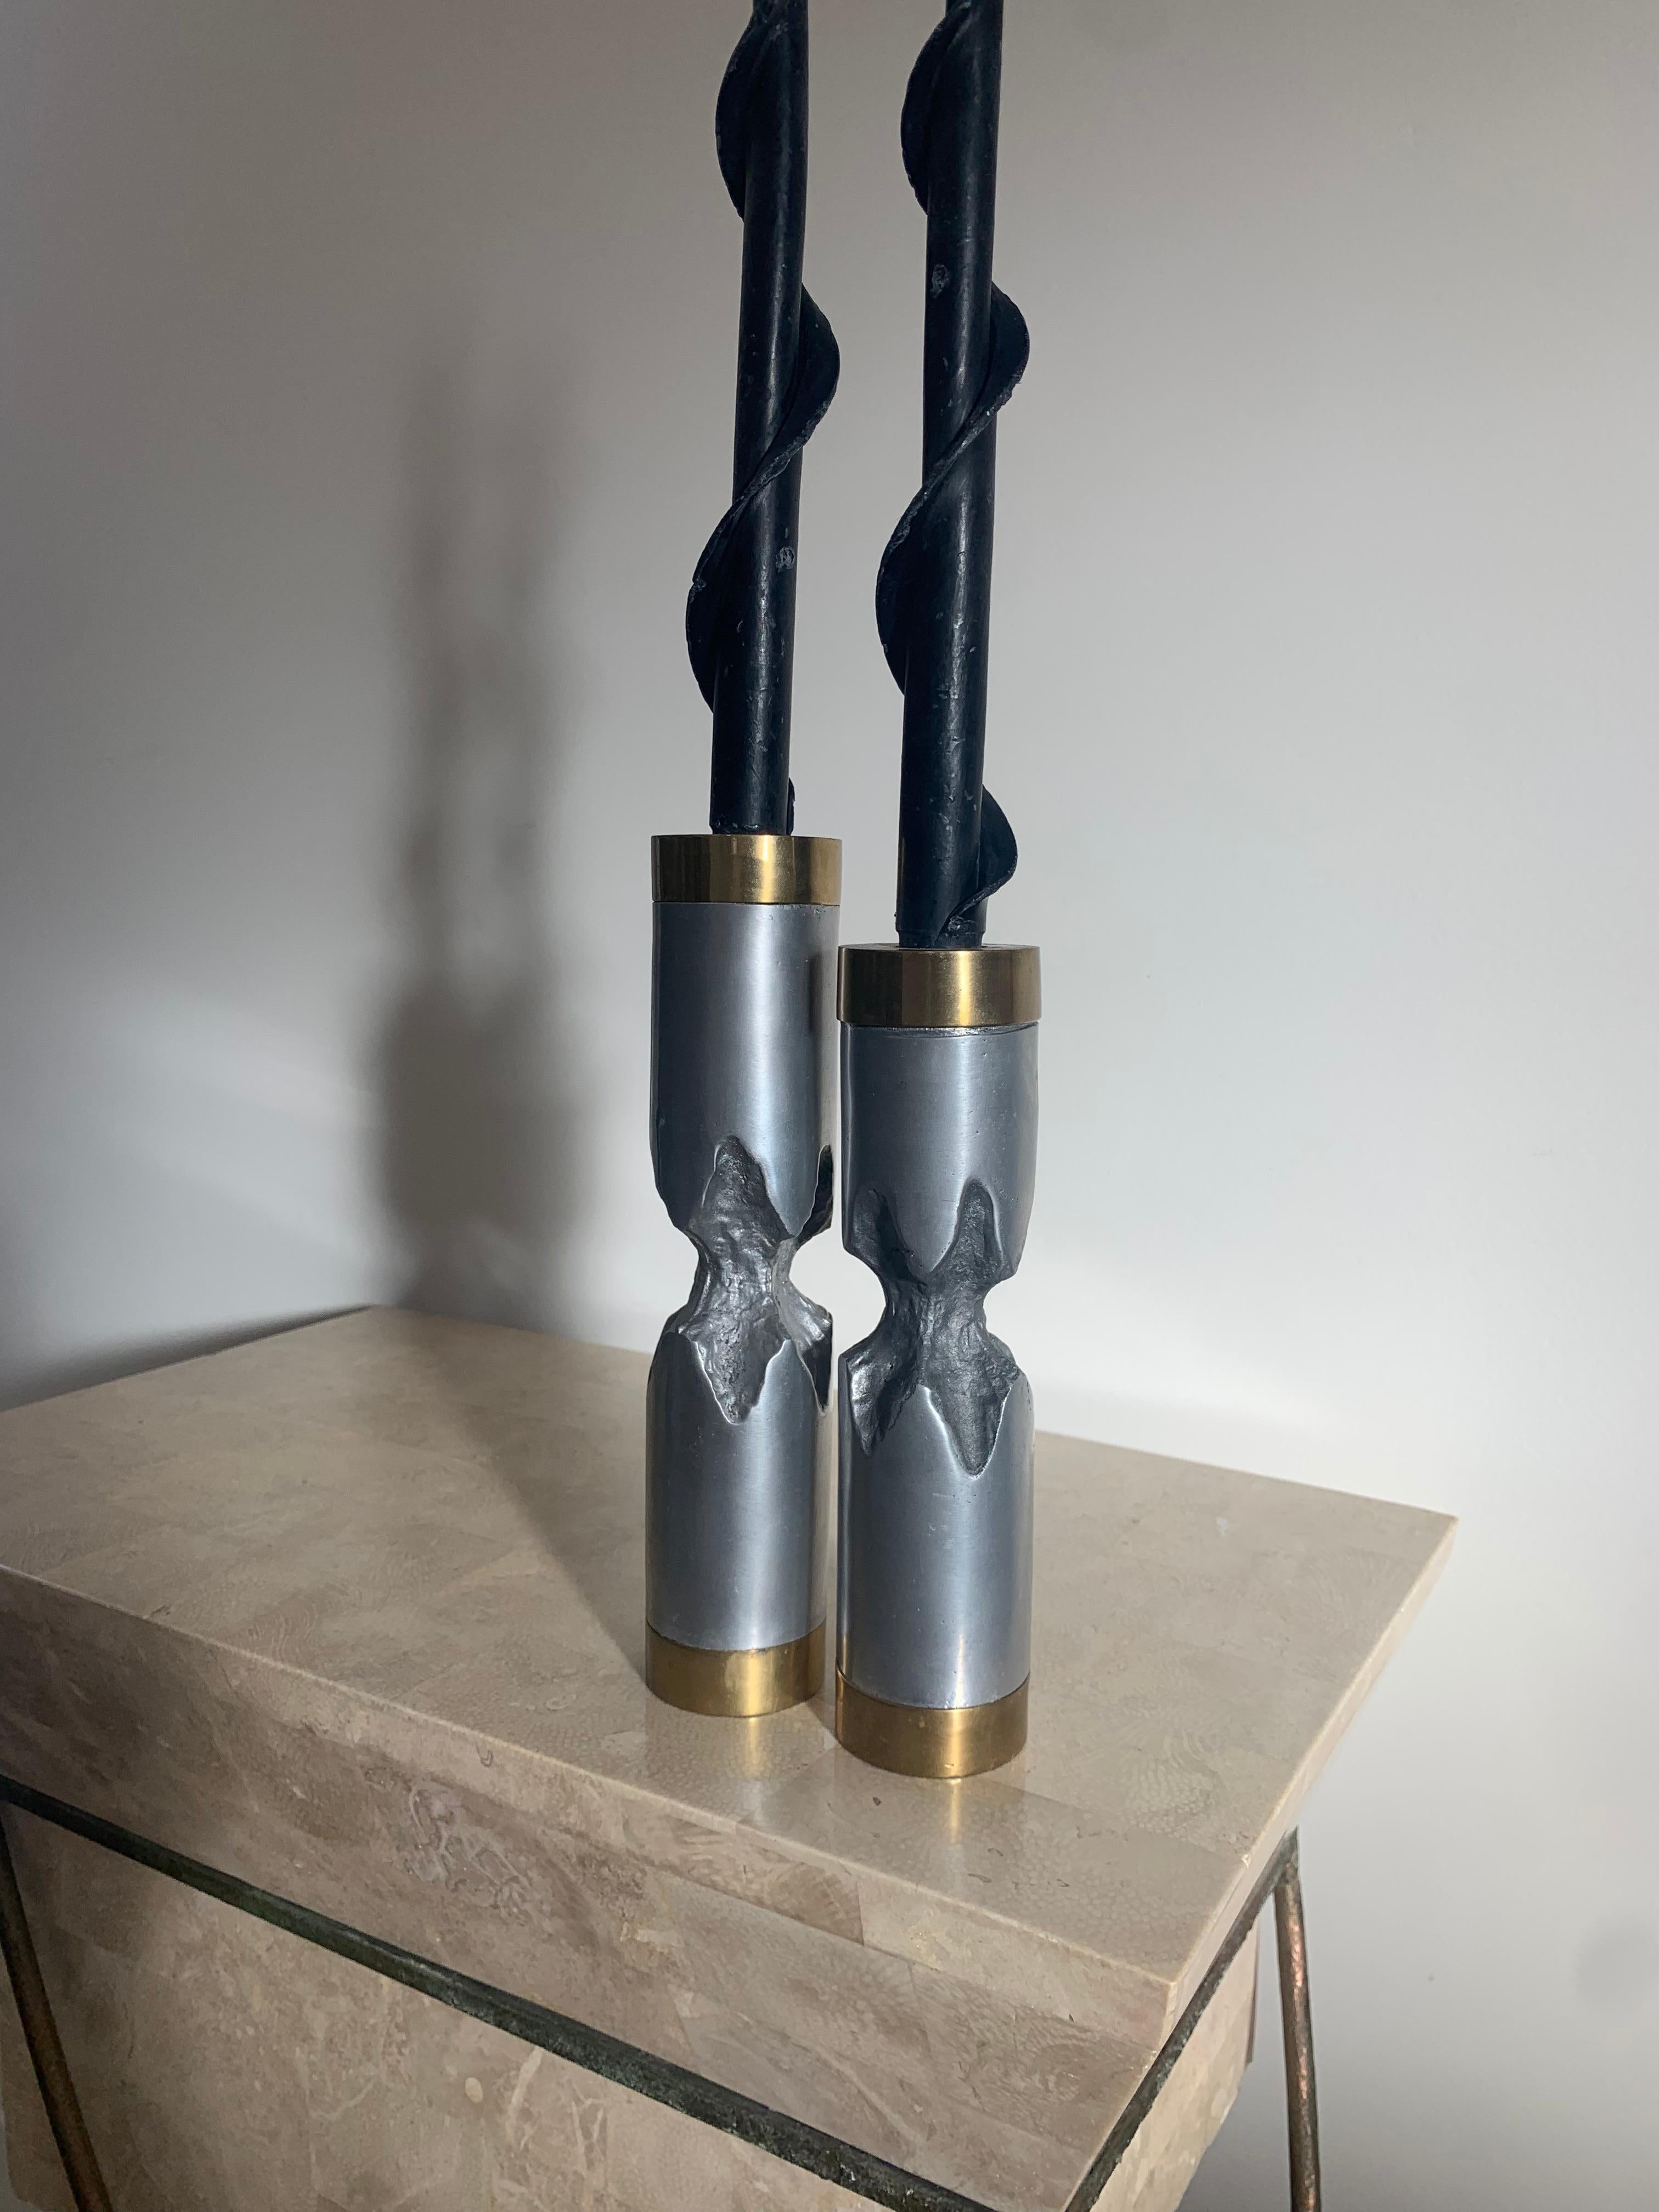 Pair of David Marshall Brutalist Metal Candlesticks, 1970s In Good Condition For Sale In View Park, CA